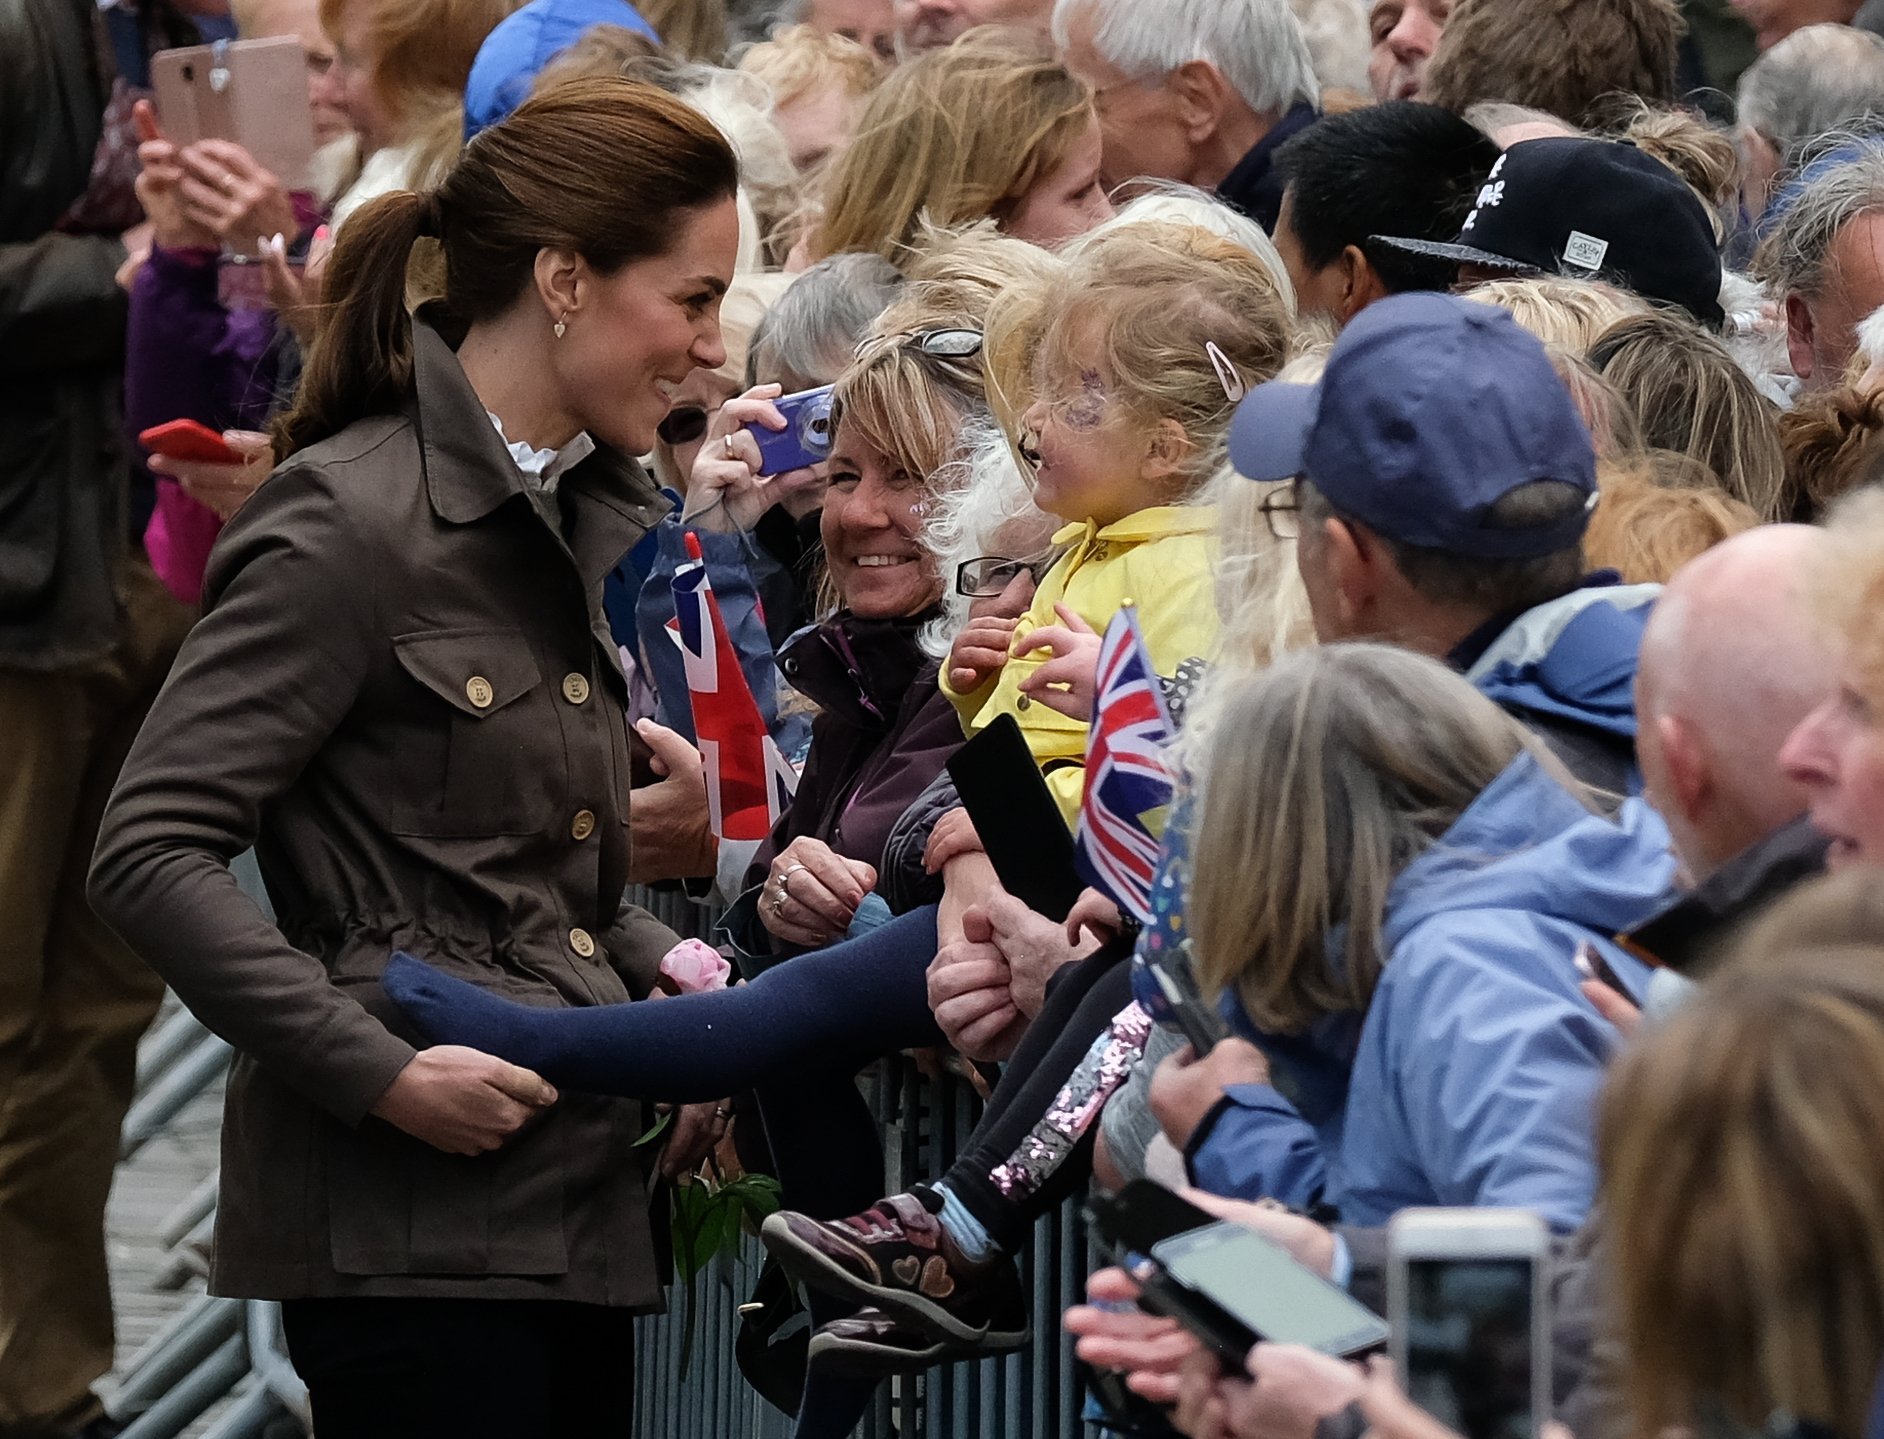 Kate Middleton greets fans at Keswick, Cumbria on June 11, 2019 | Photo: Getty Images